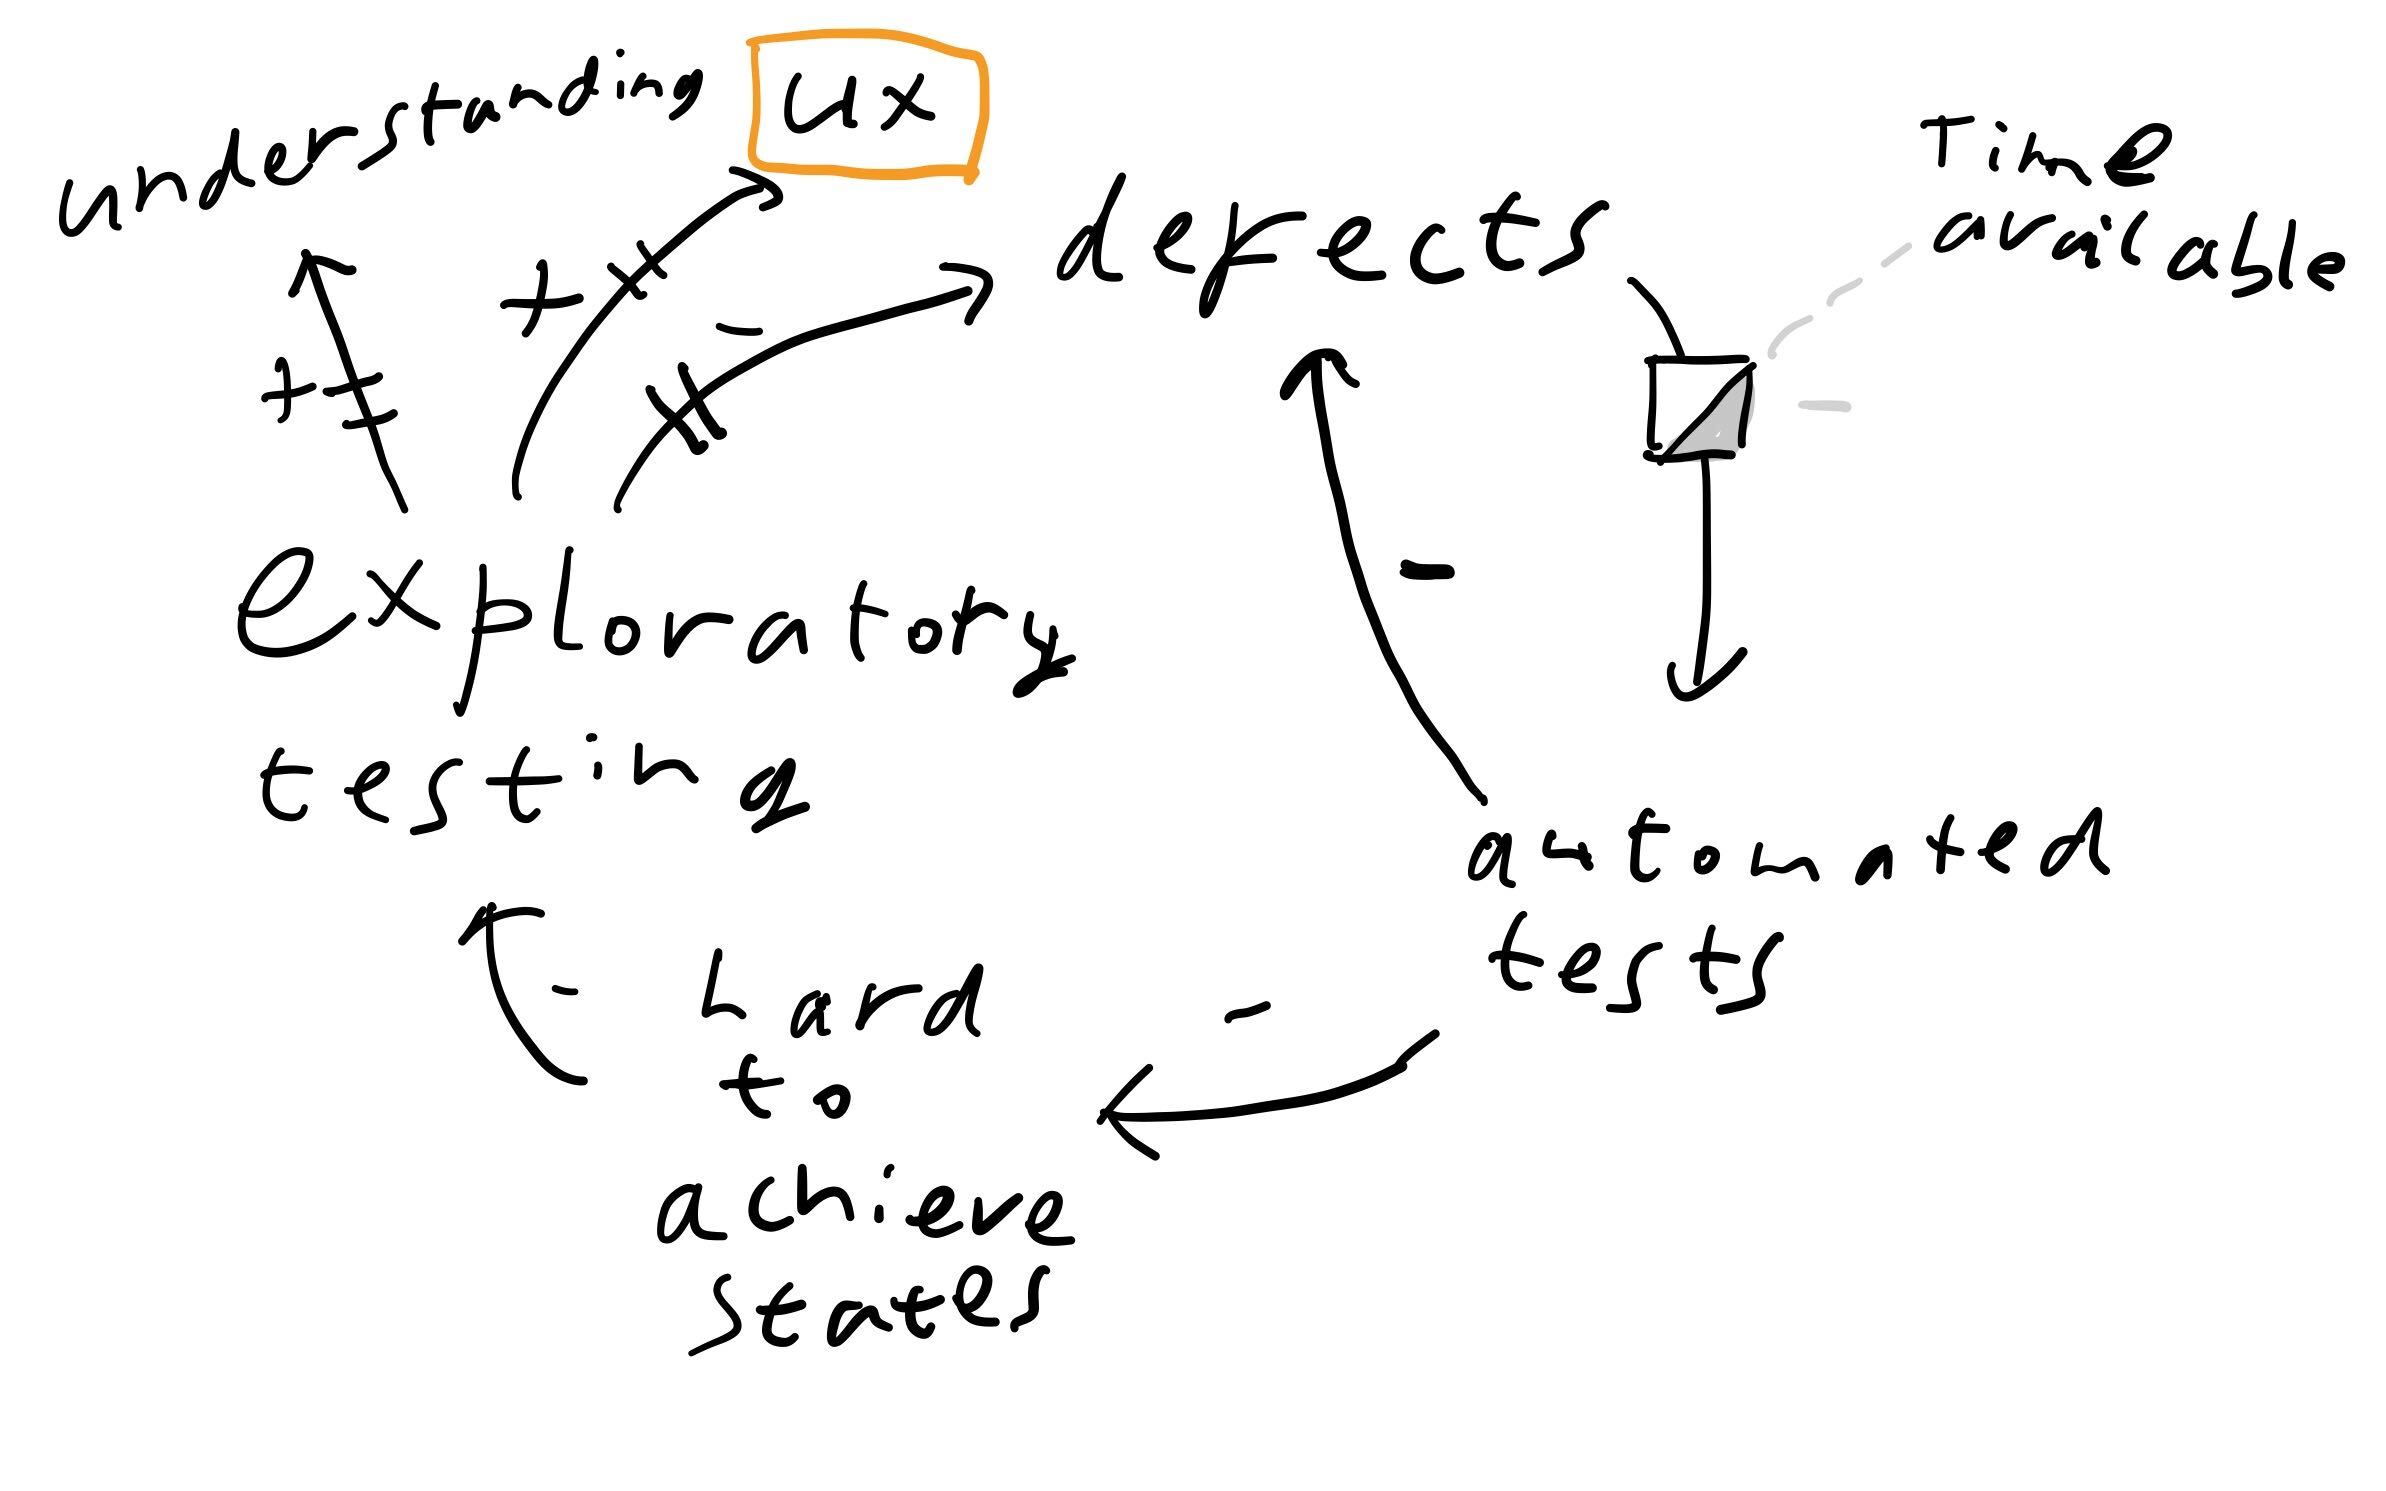 Diagram of effects, explained in words below.